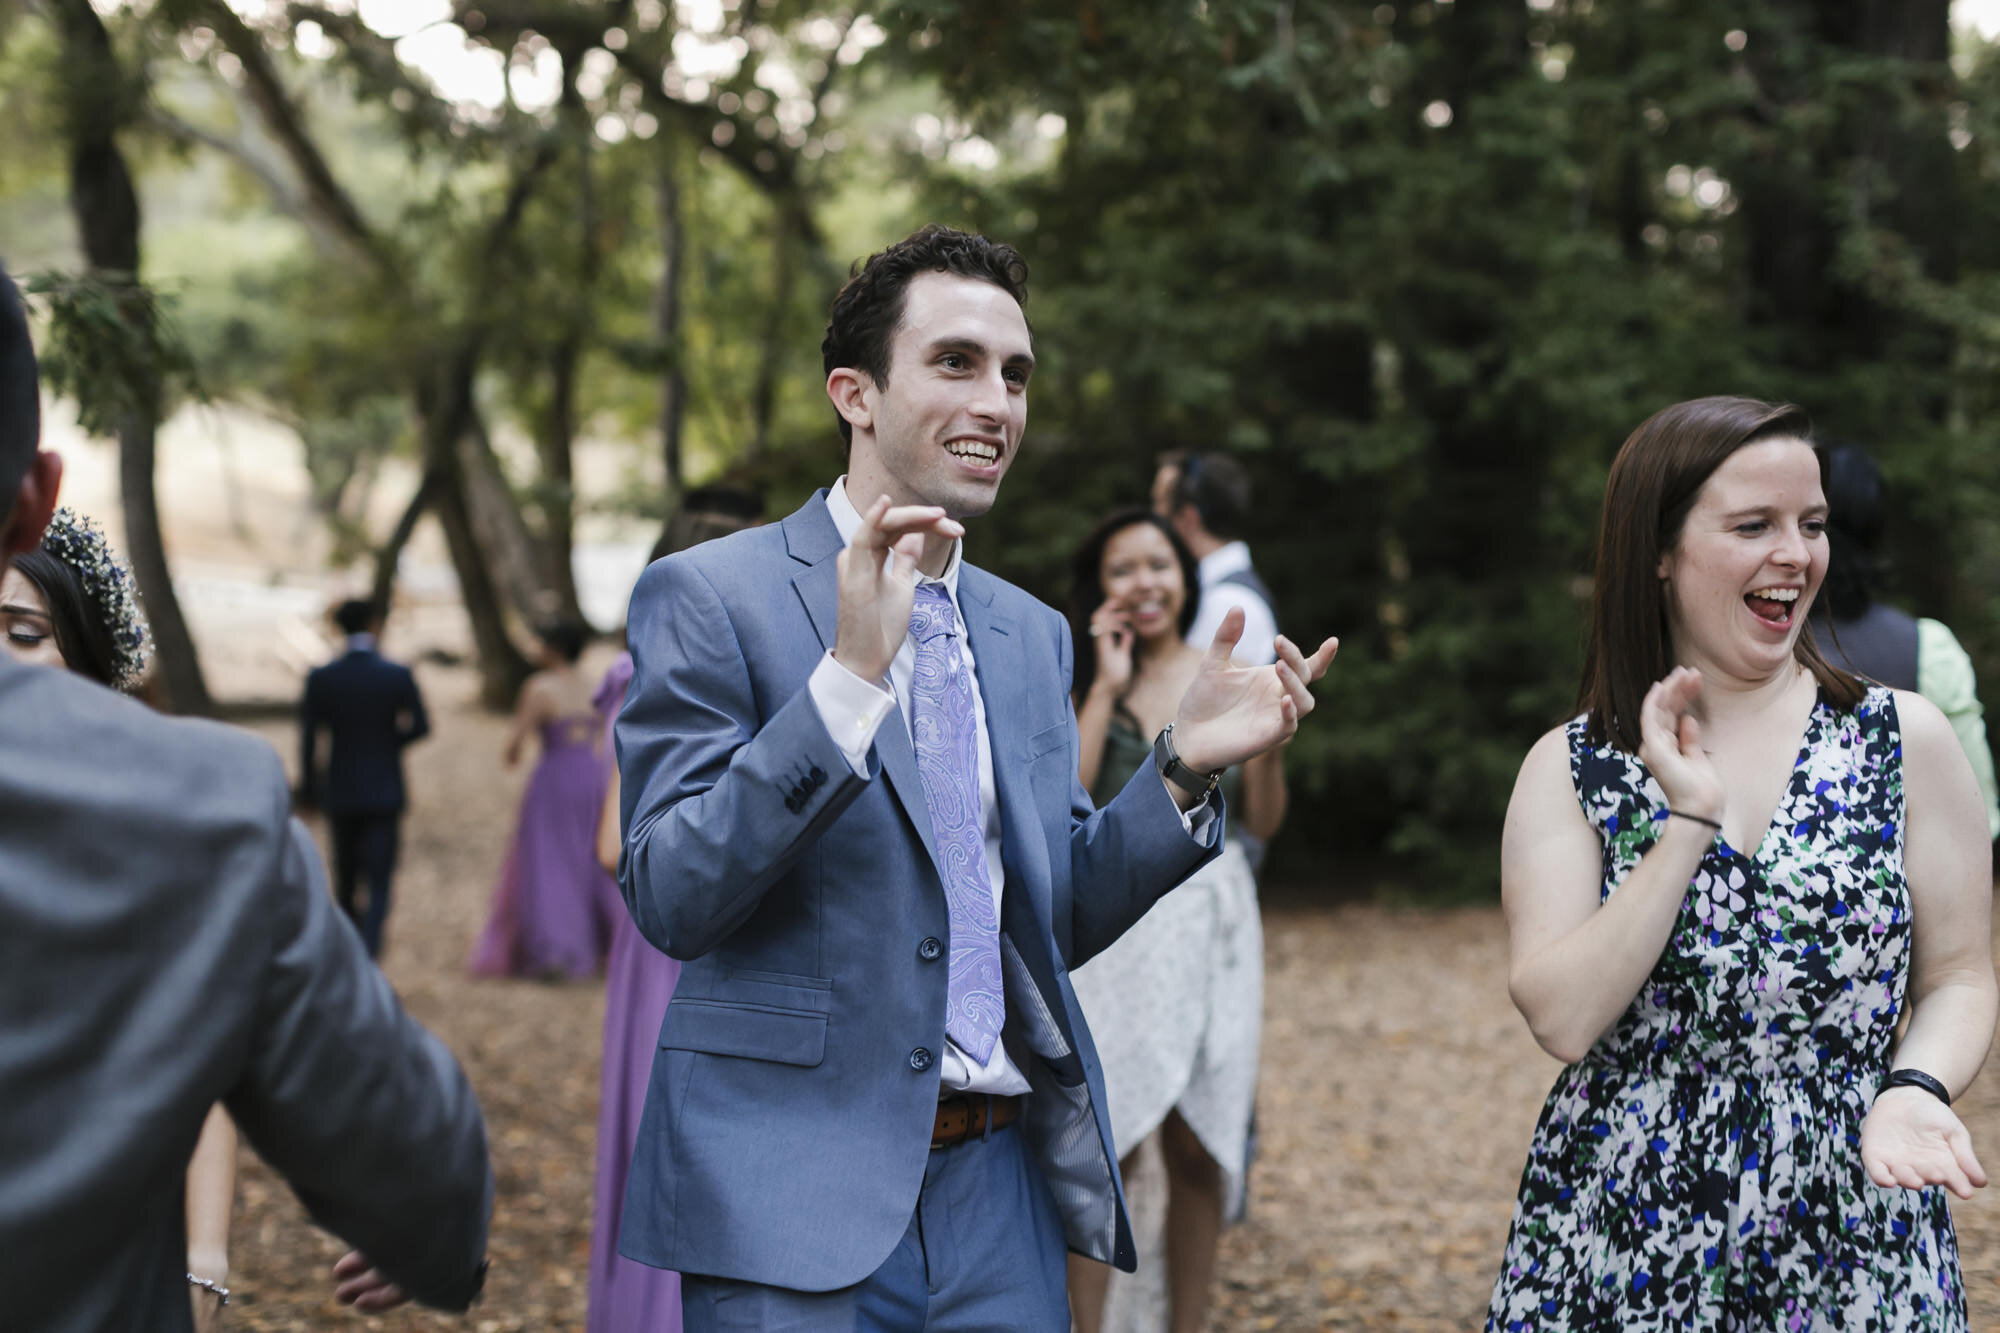 Guests enjoy dancing outdoors in a redwood forest